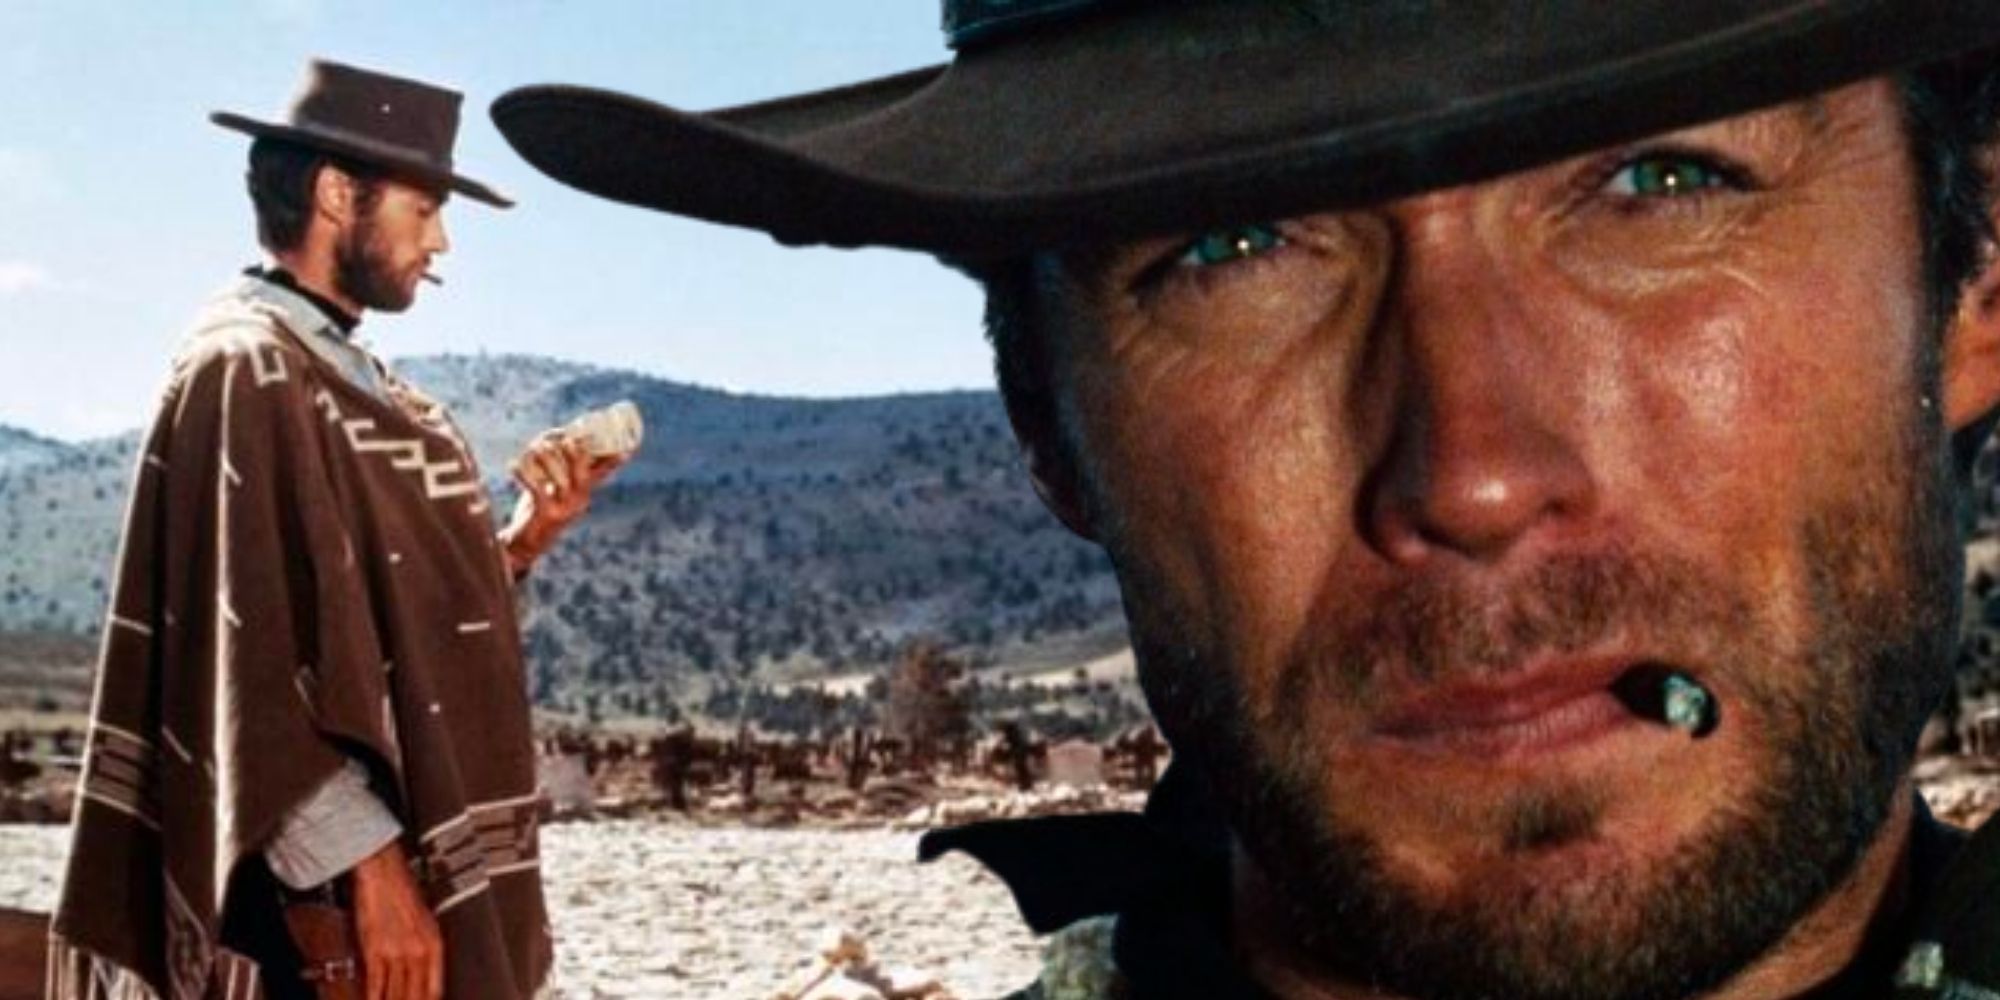 The Good the Bad and the Ugly Clint Eastwood in his poncho and smoking a cigar